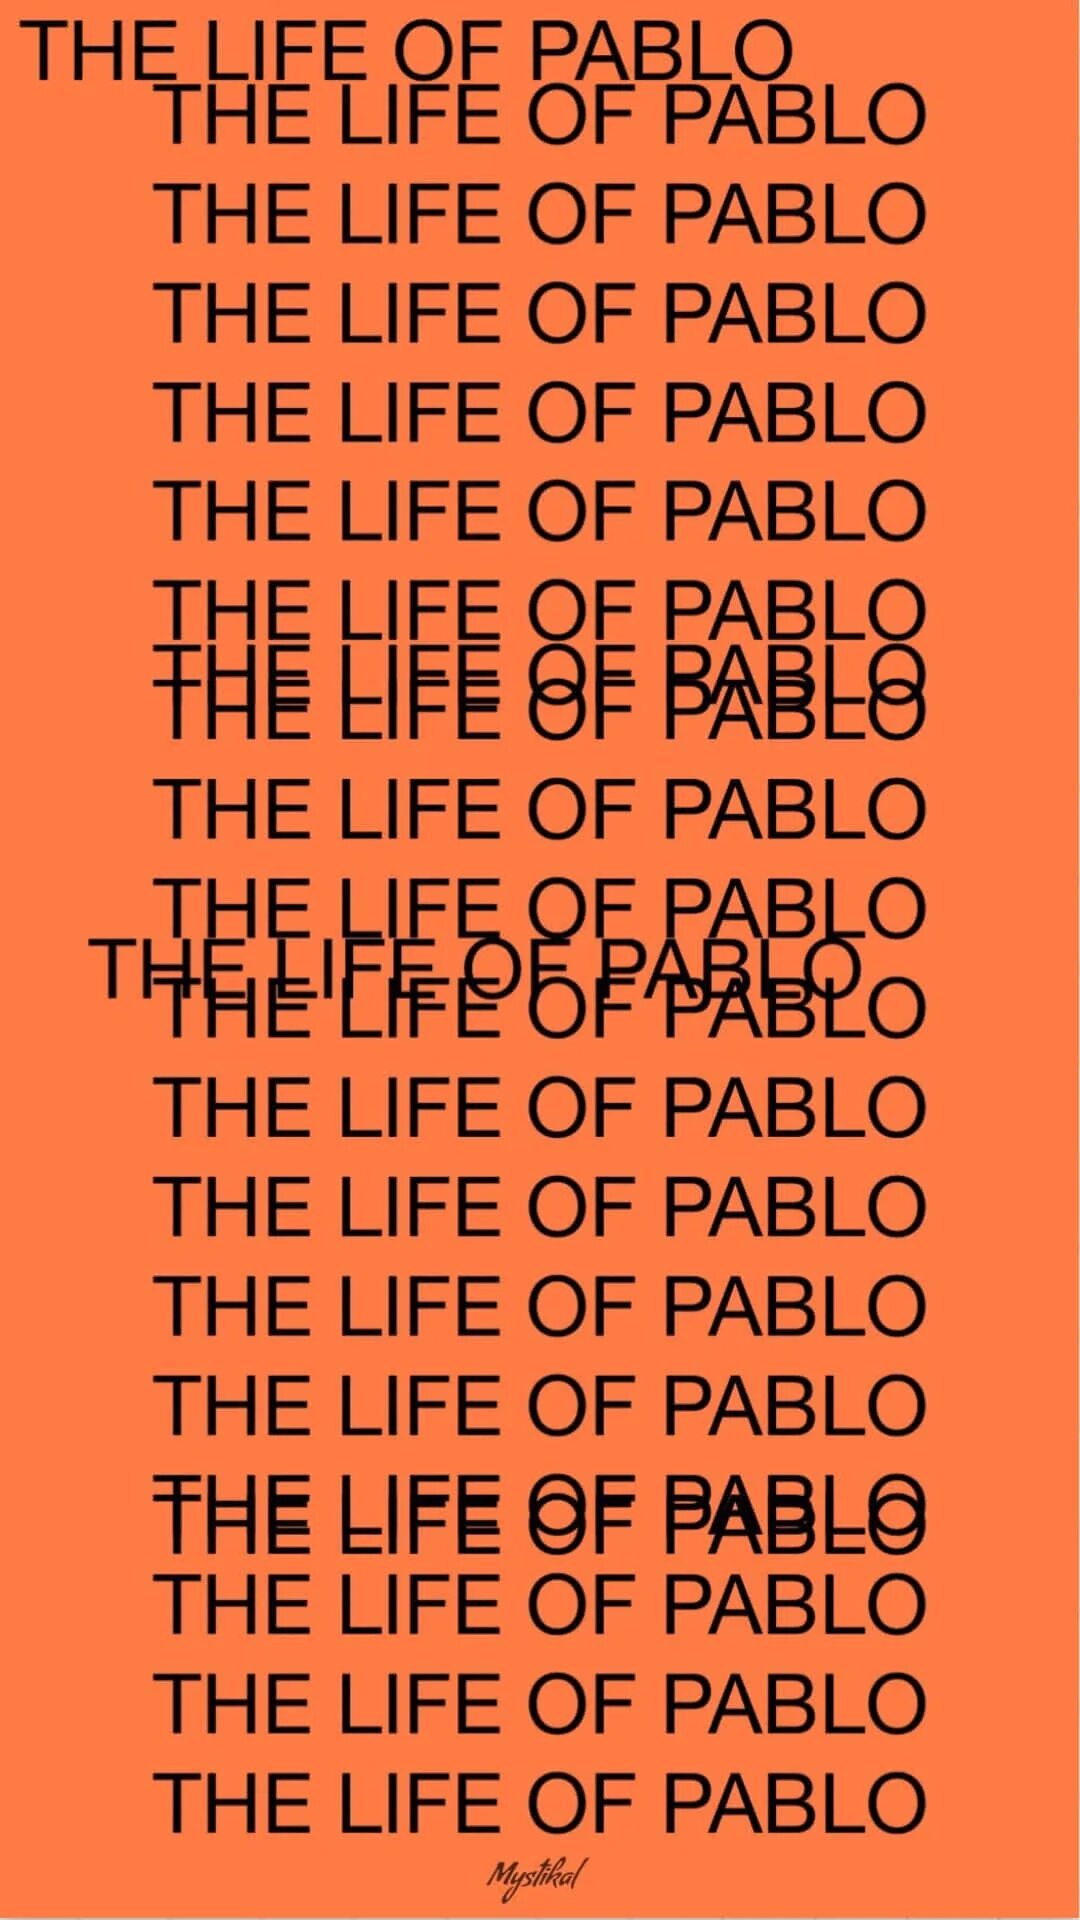 The Life of Pablo обложка. The Life of Pablo Cover. The Life of Pablo Wallpaper iphone. Kanye West the Life of Pablo обложка.